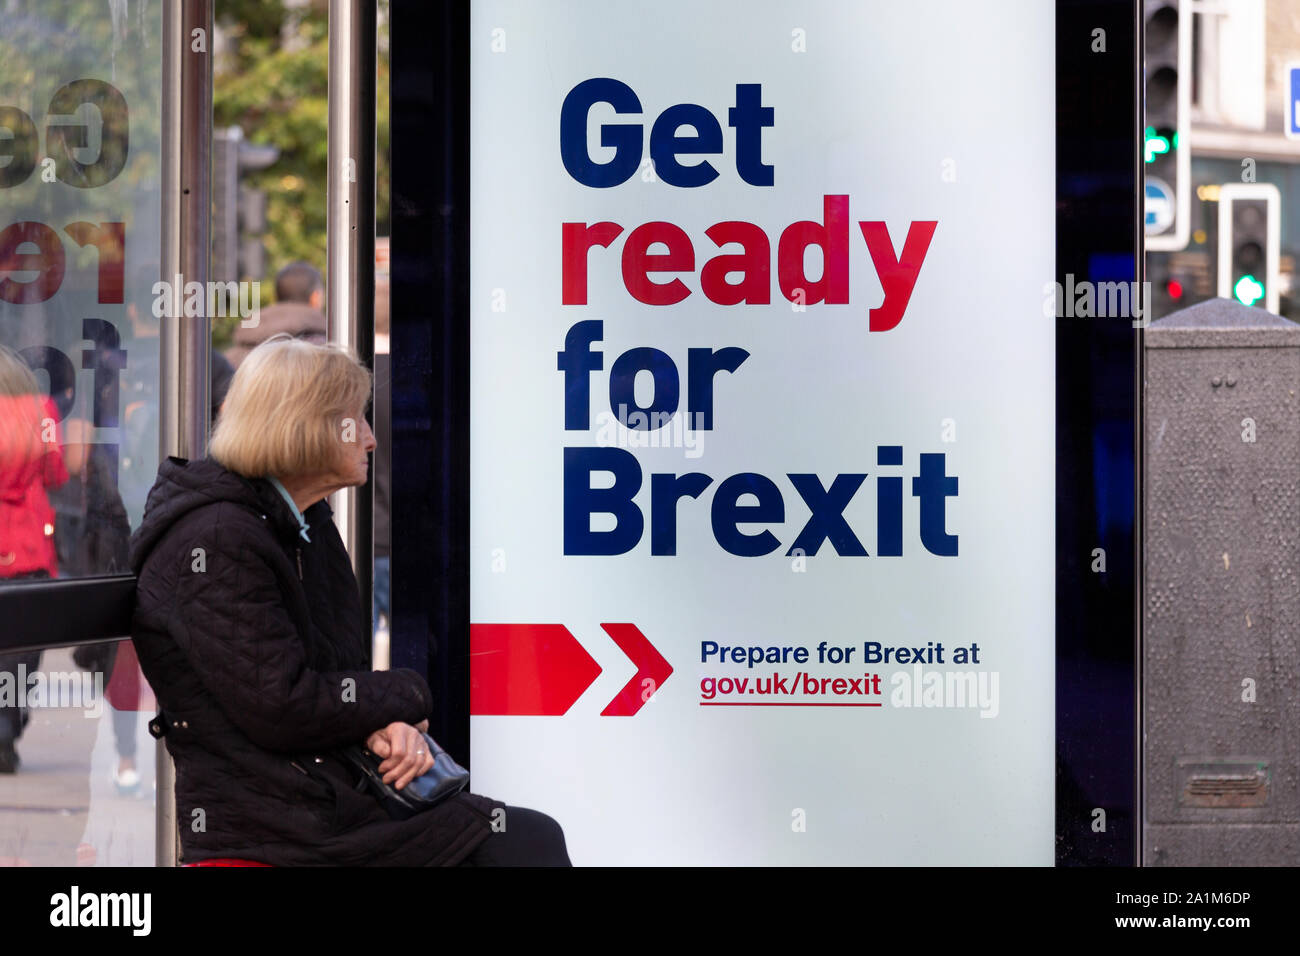 London UK. 27 September 2019. Get ready for Brexit HM Government advertising on bus shelters. Stock Photo